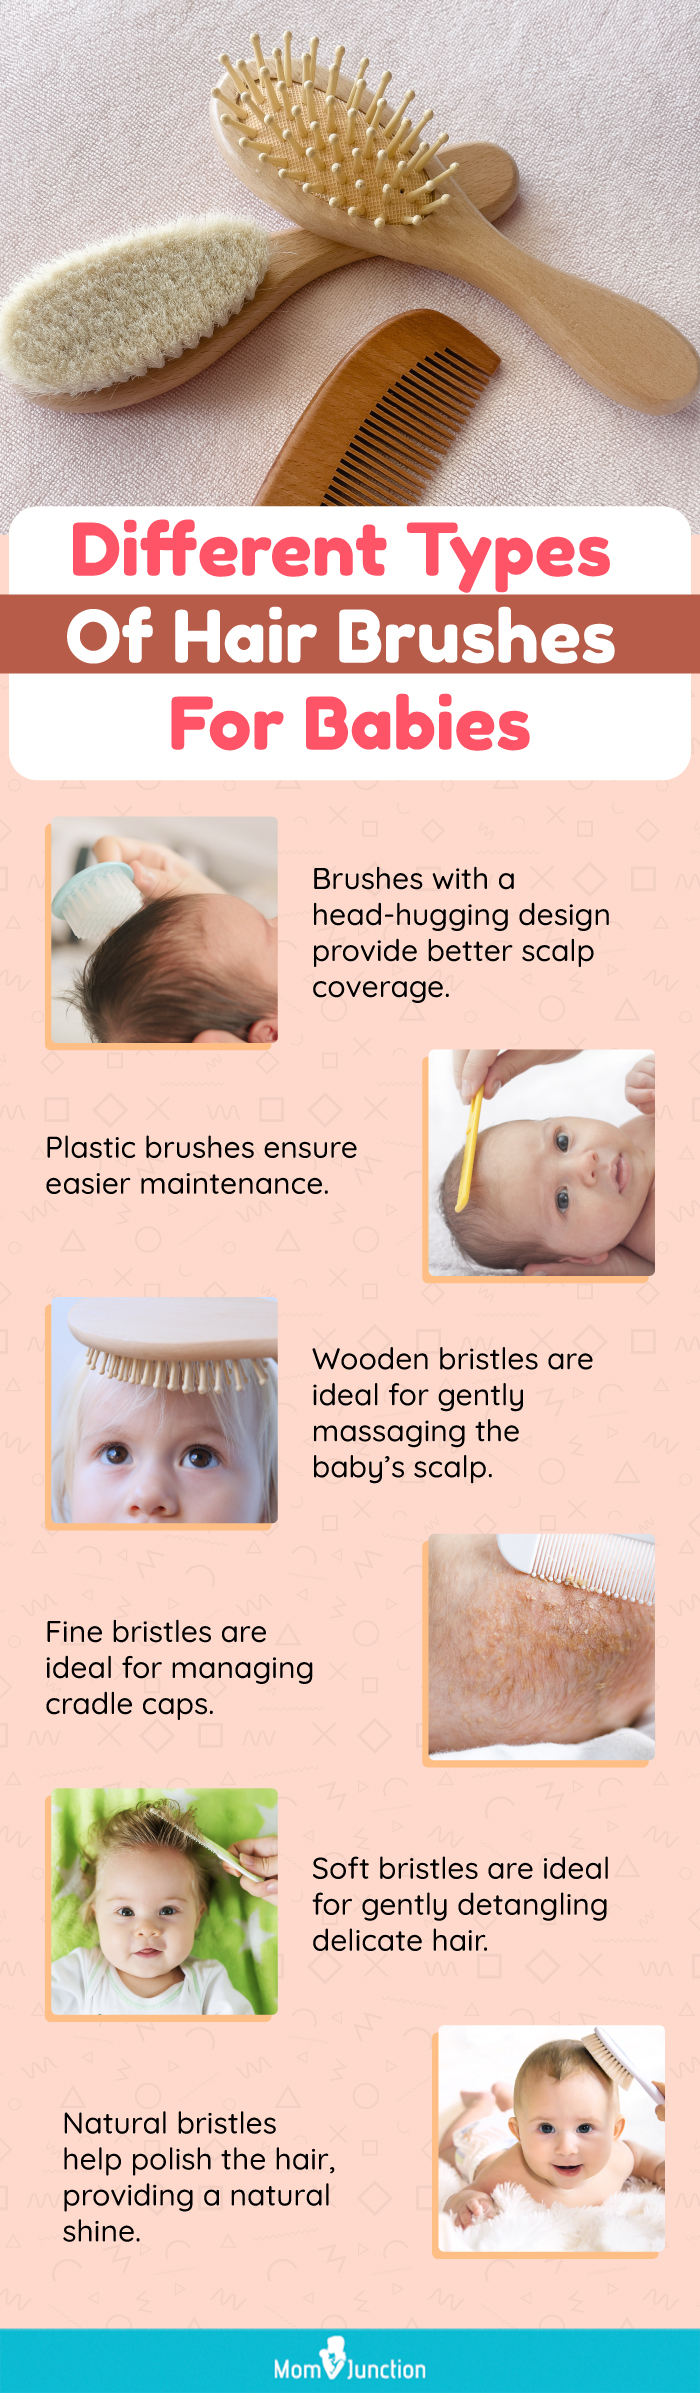 Different Types Of Hair Brushes For Babies (infographic)